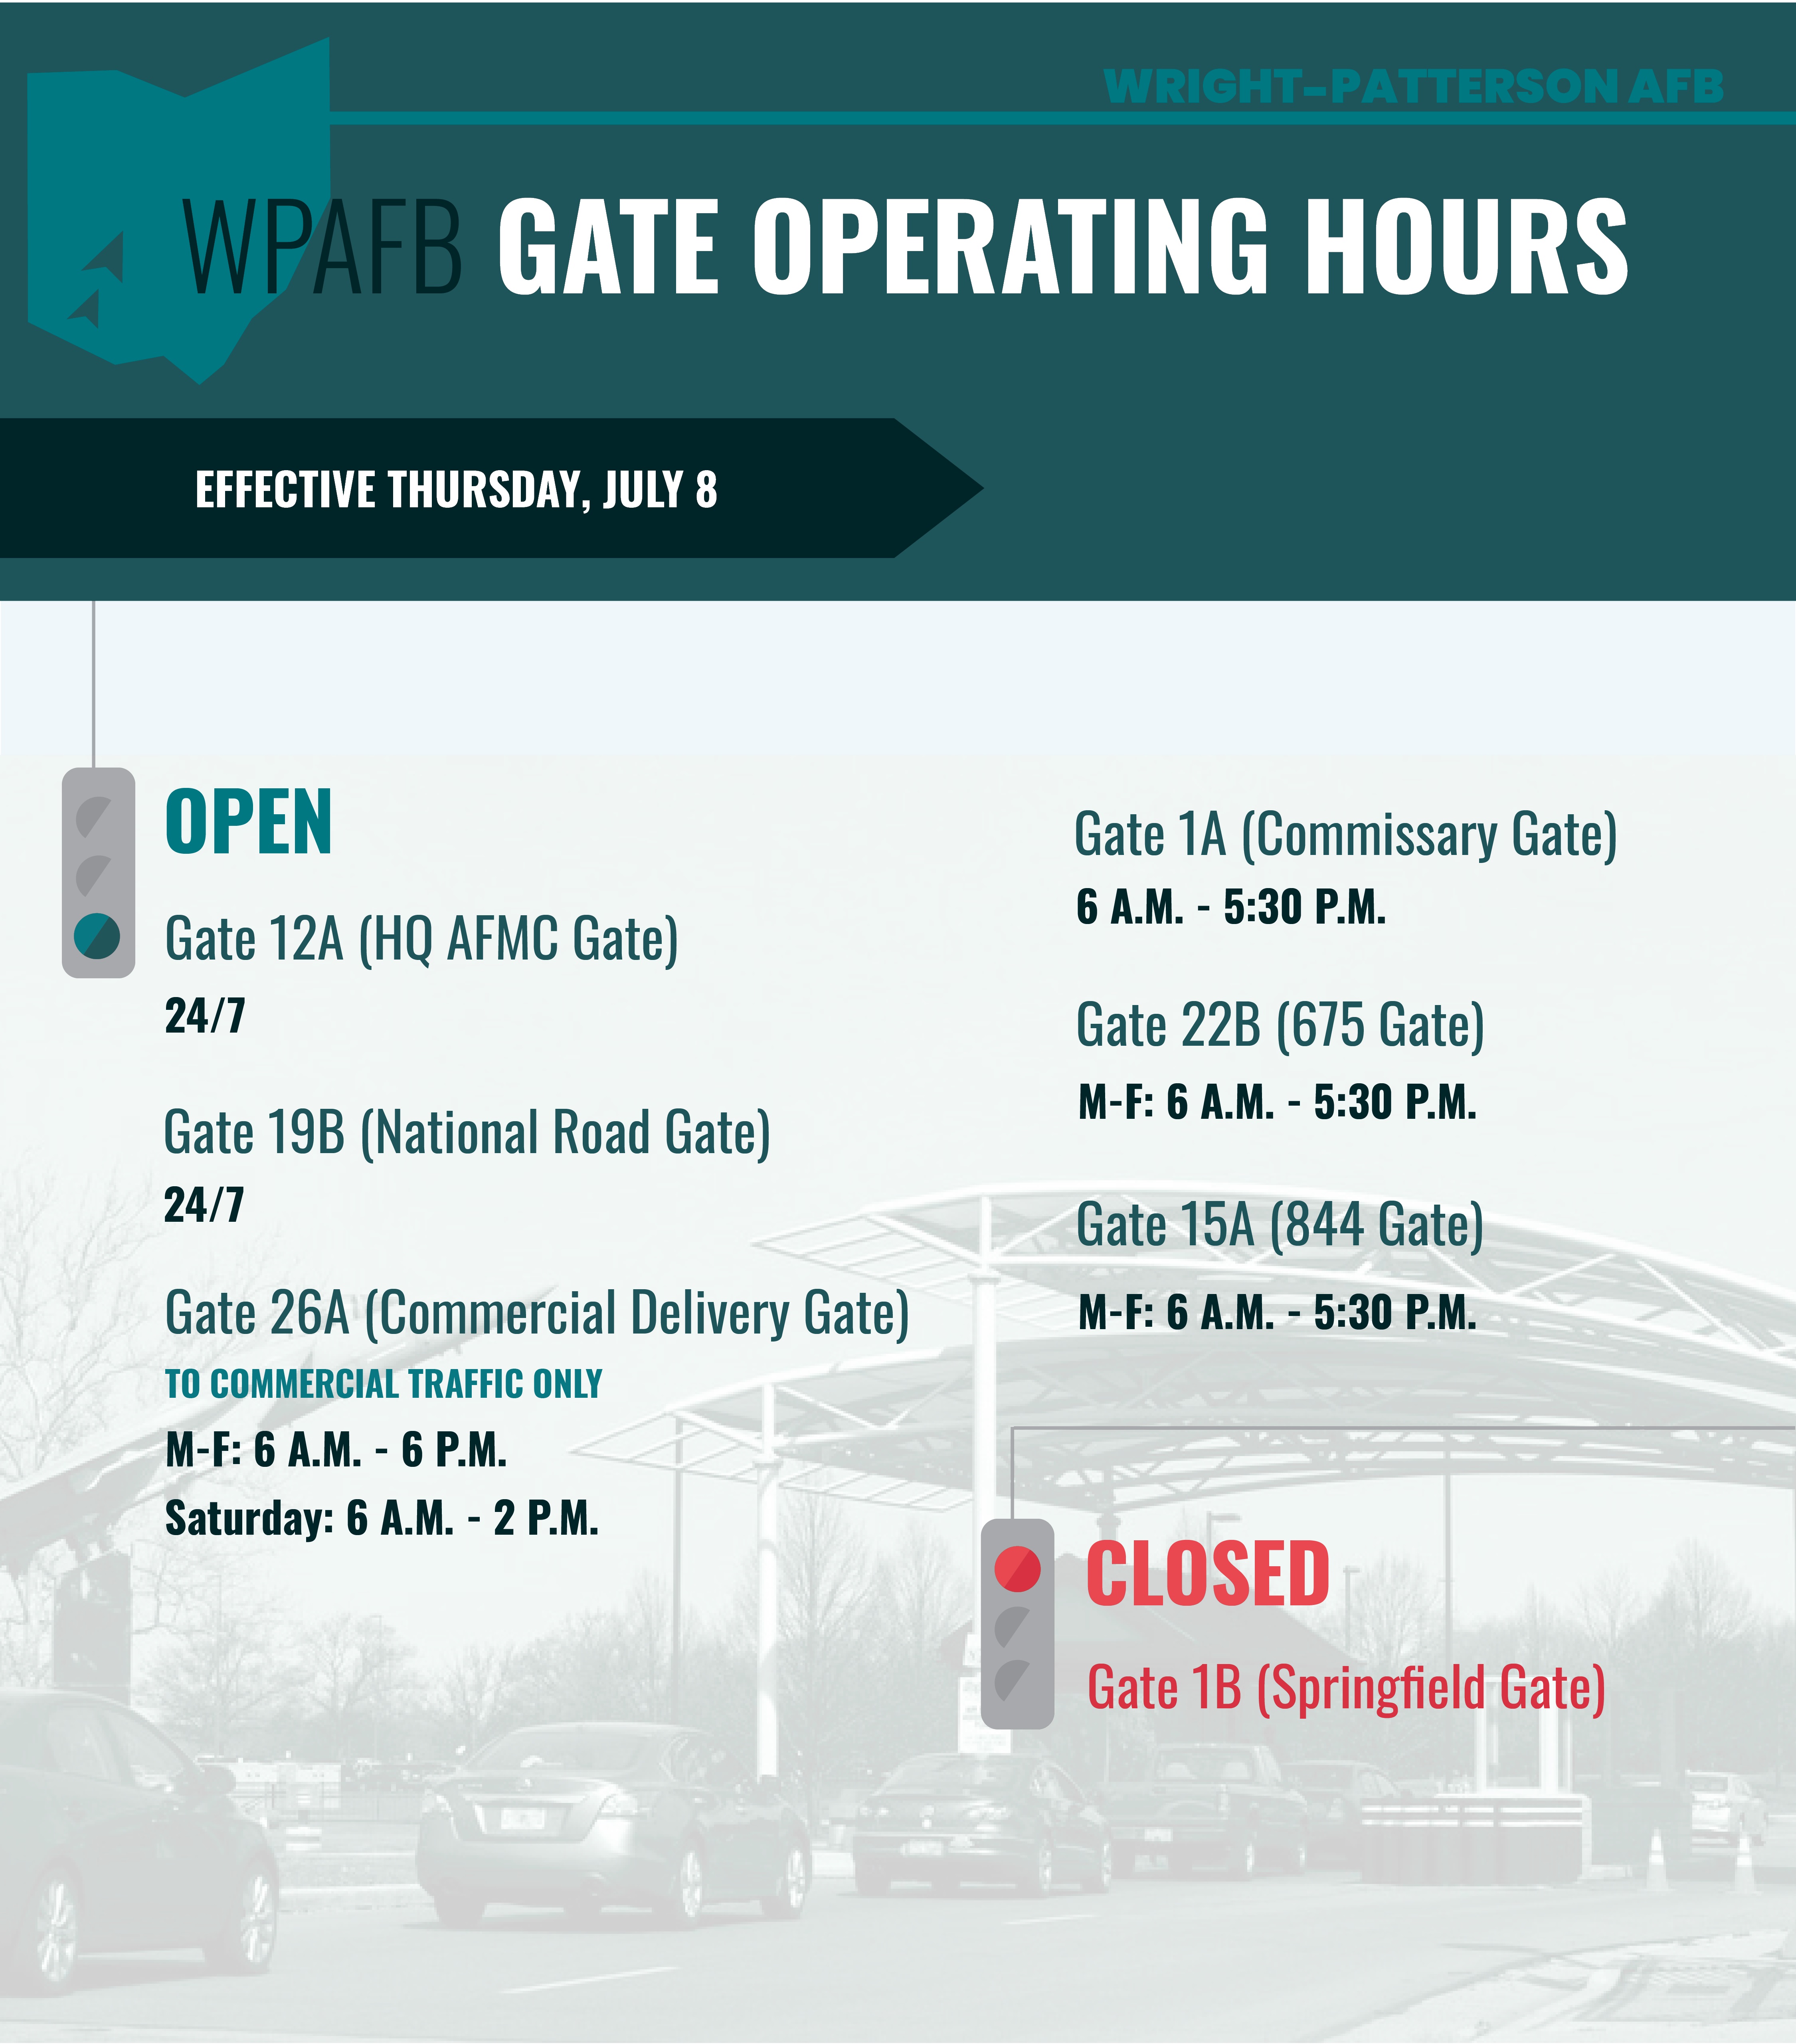 WPAFB Gate Operating Hours